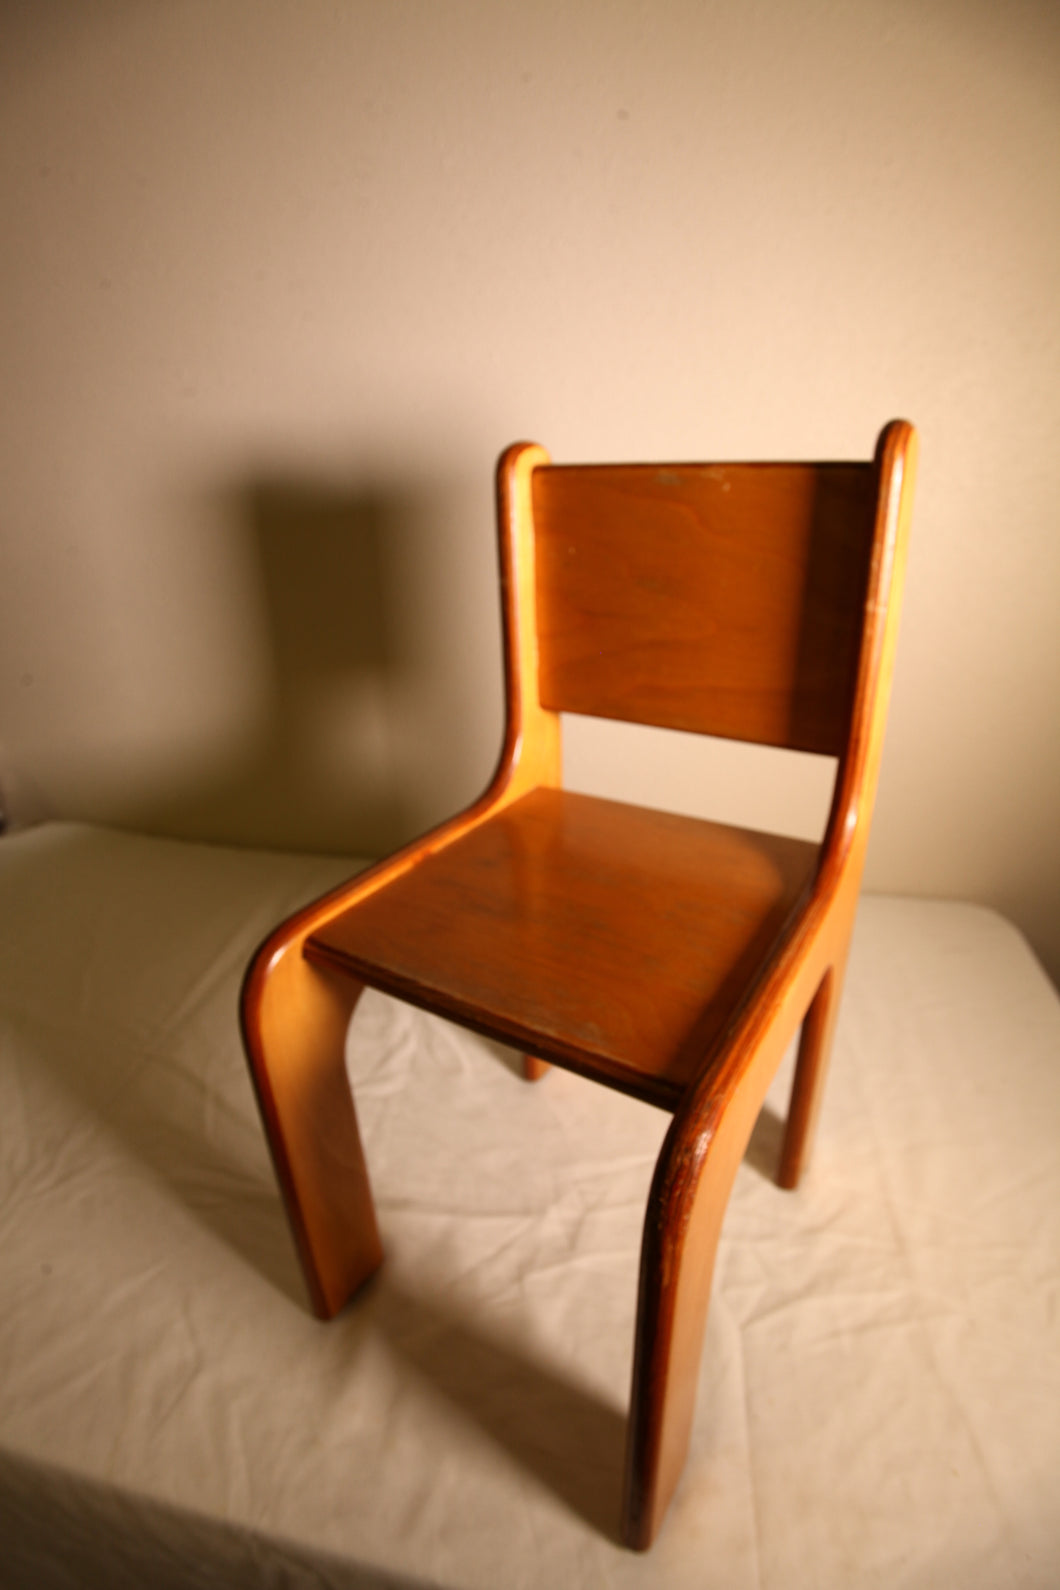 Wooden Chair #2: 11.5 Inches